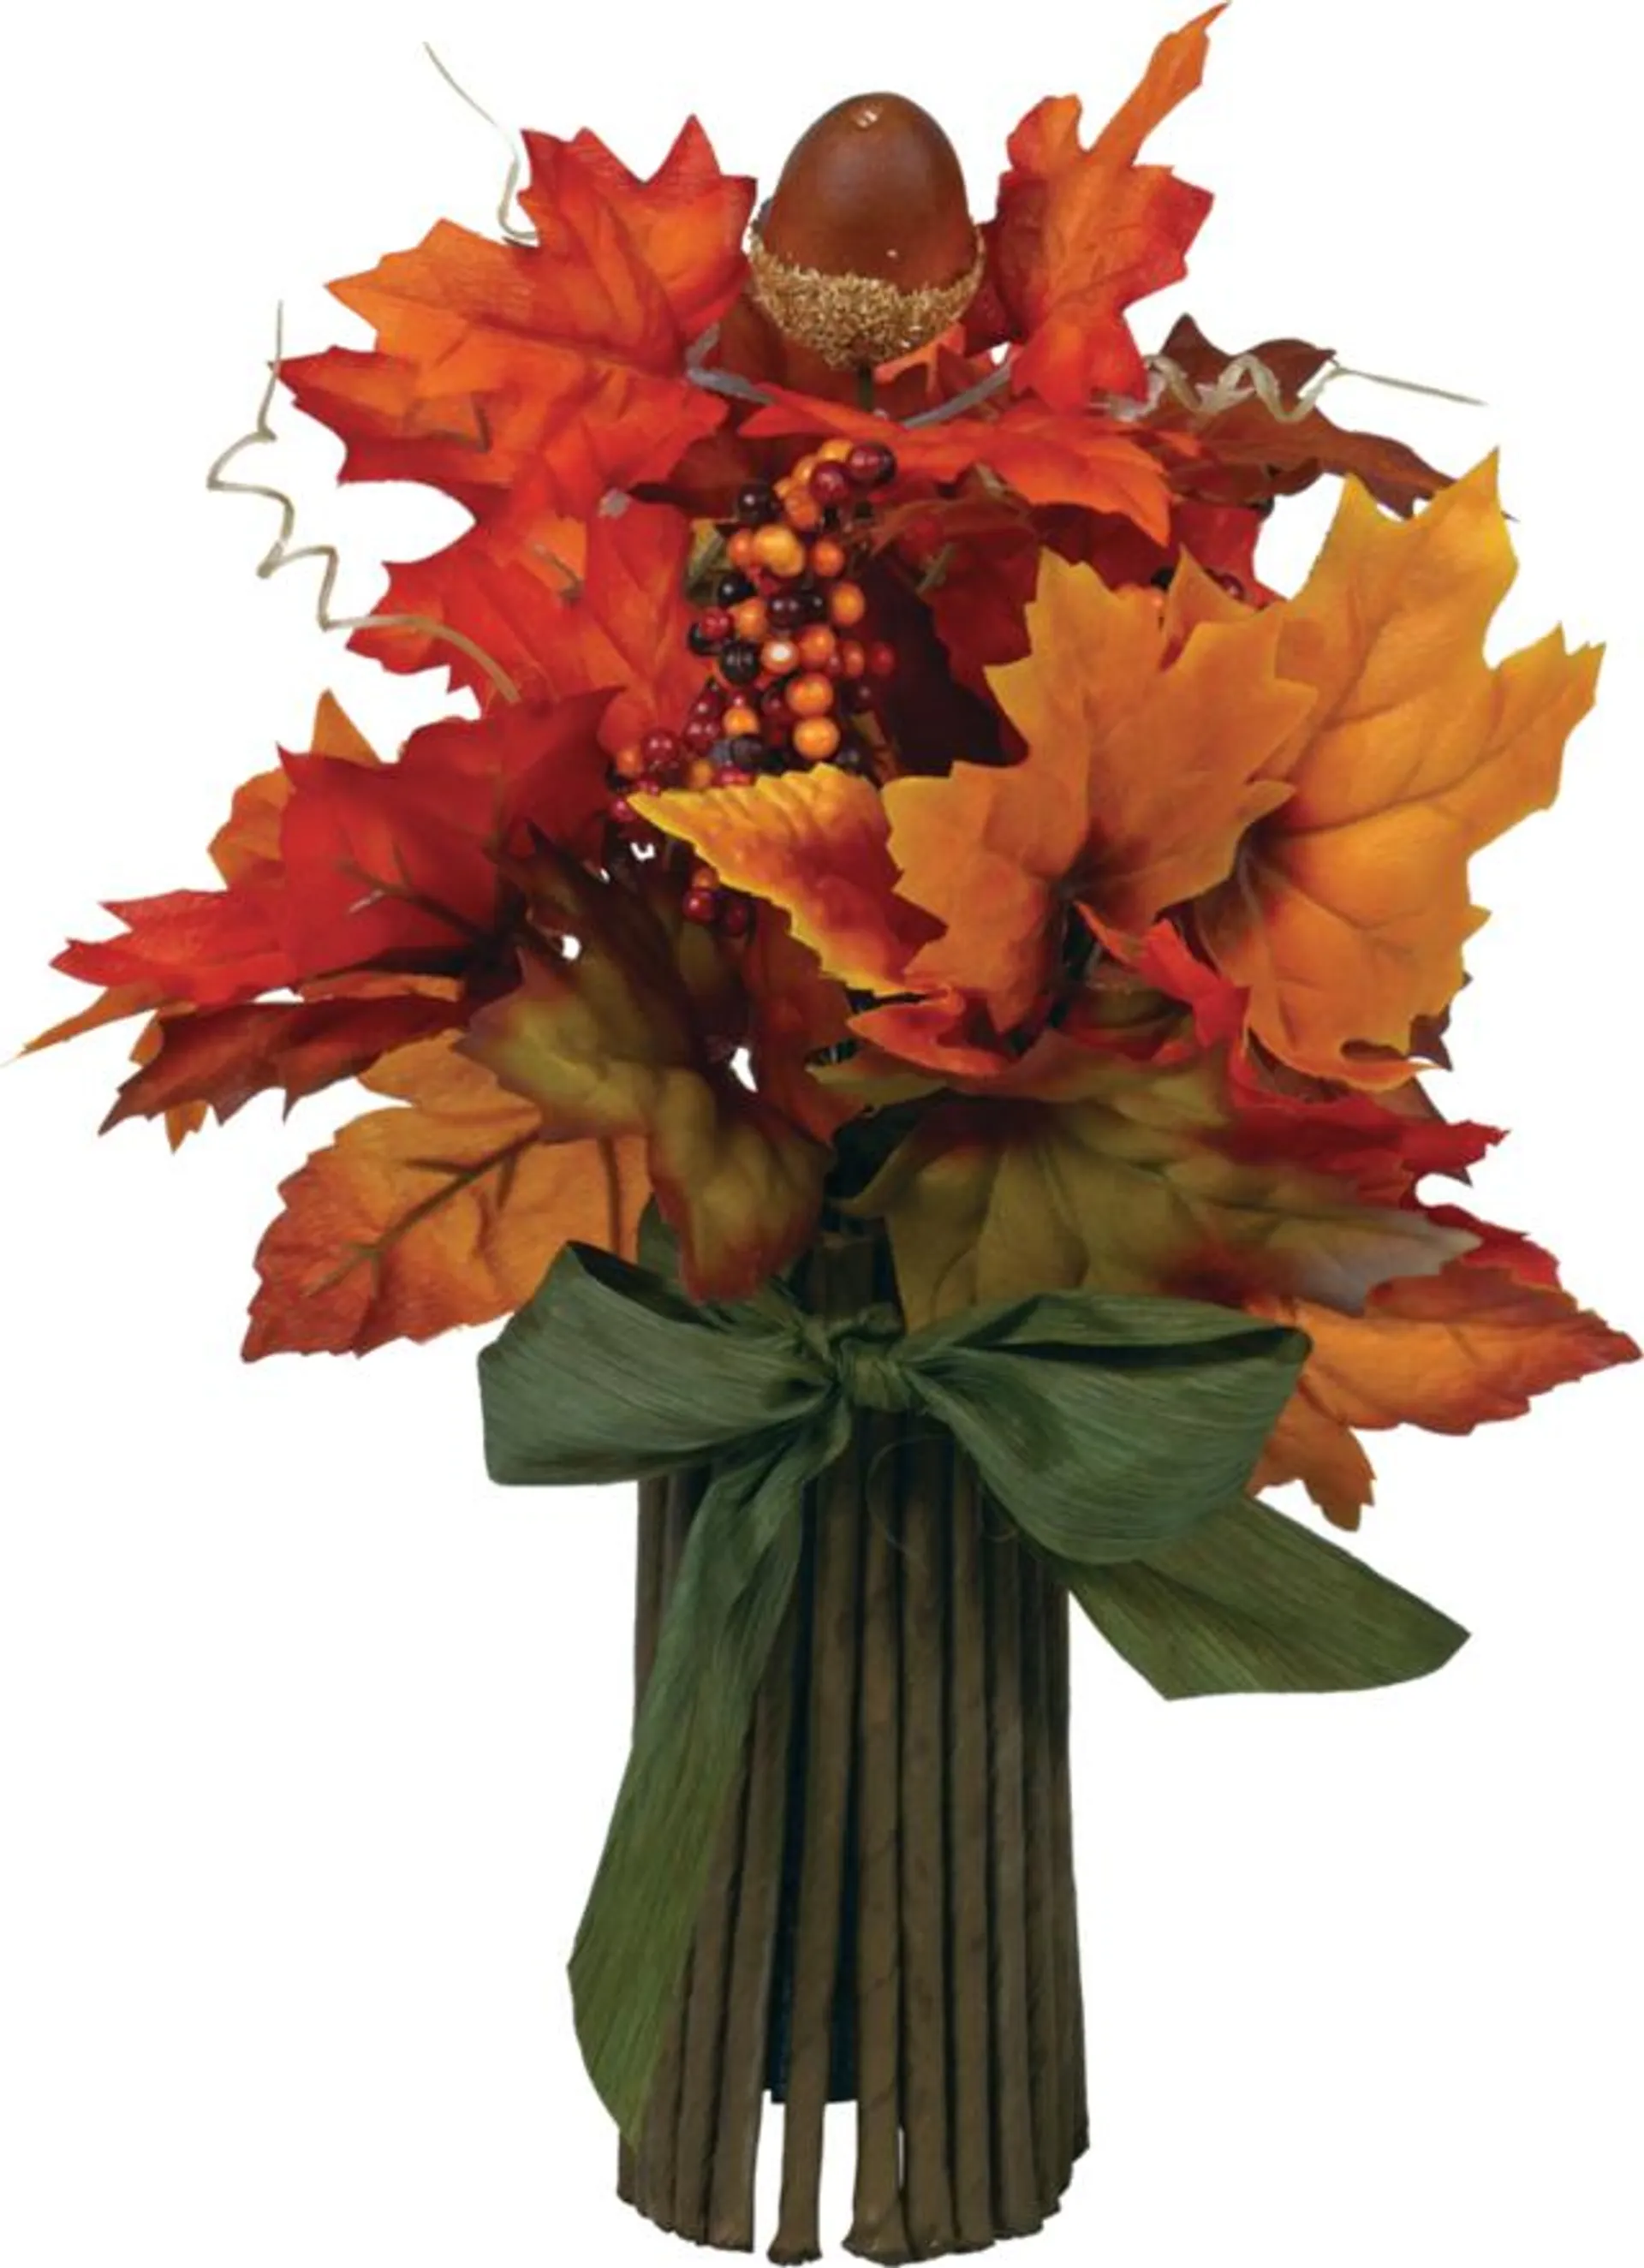 Leaf & Berries Bouquet Table Prop, Multi-Coloured, 12-in, Indoor/Outdoor Decoration for Thanksgiving